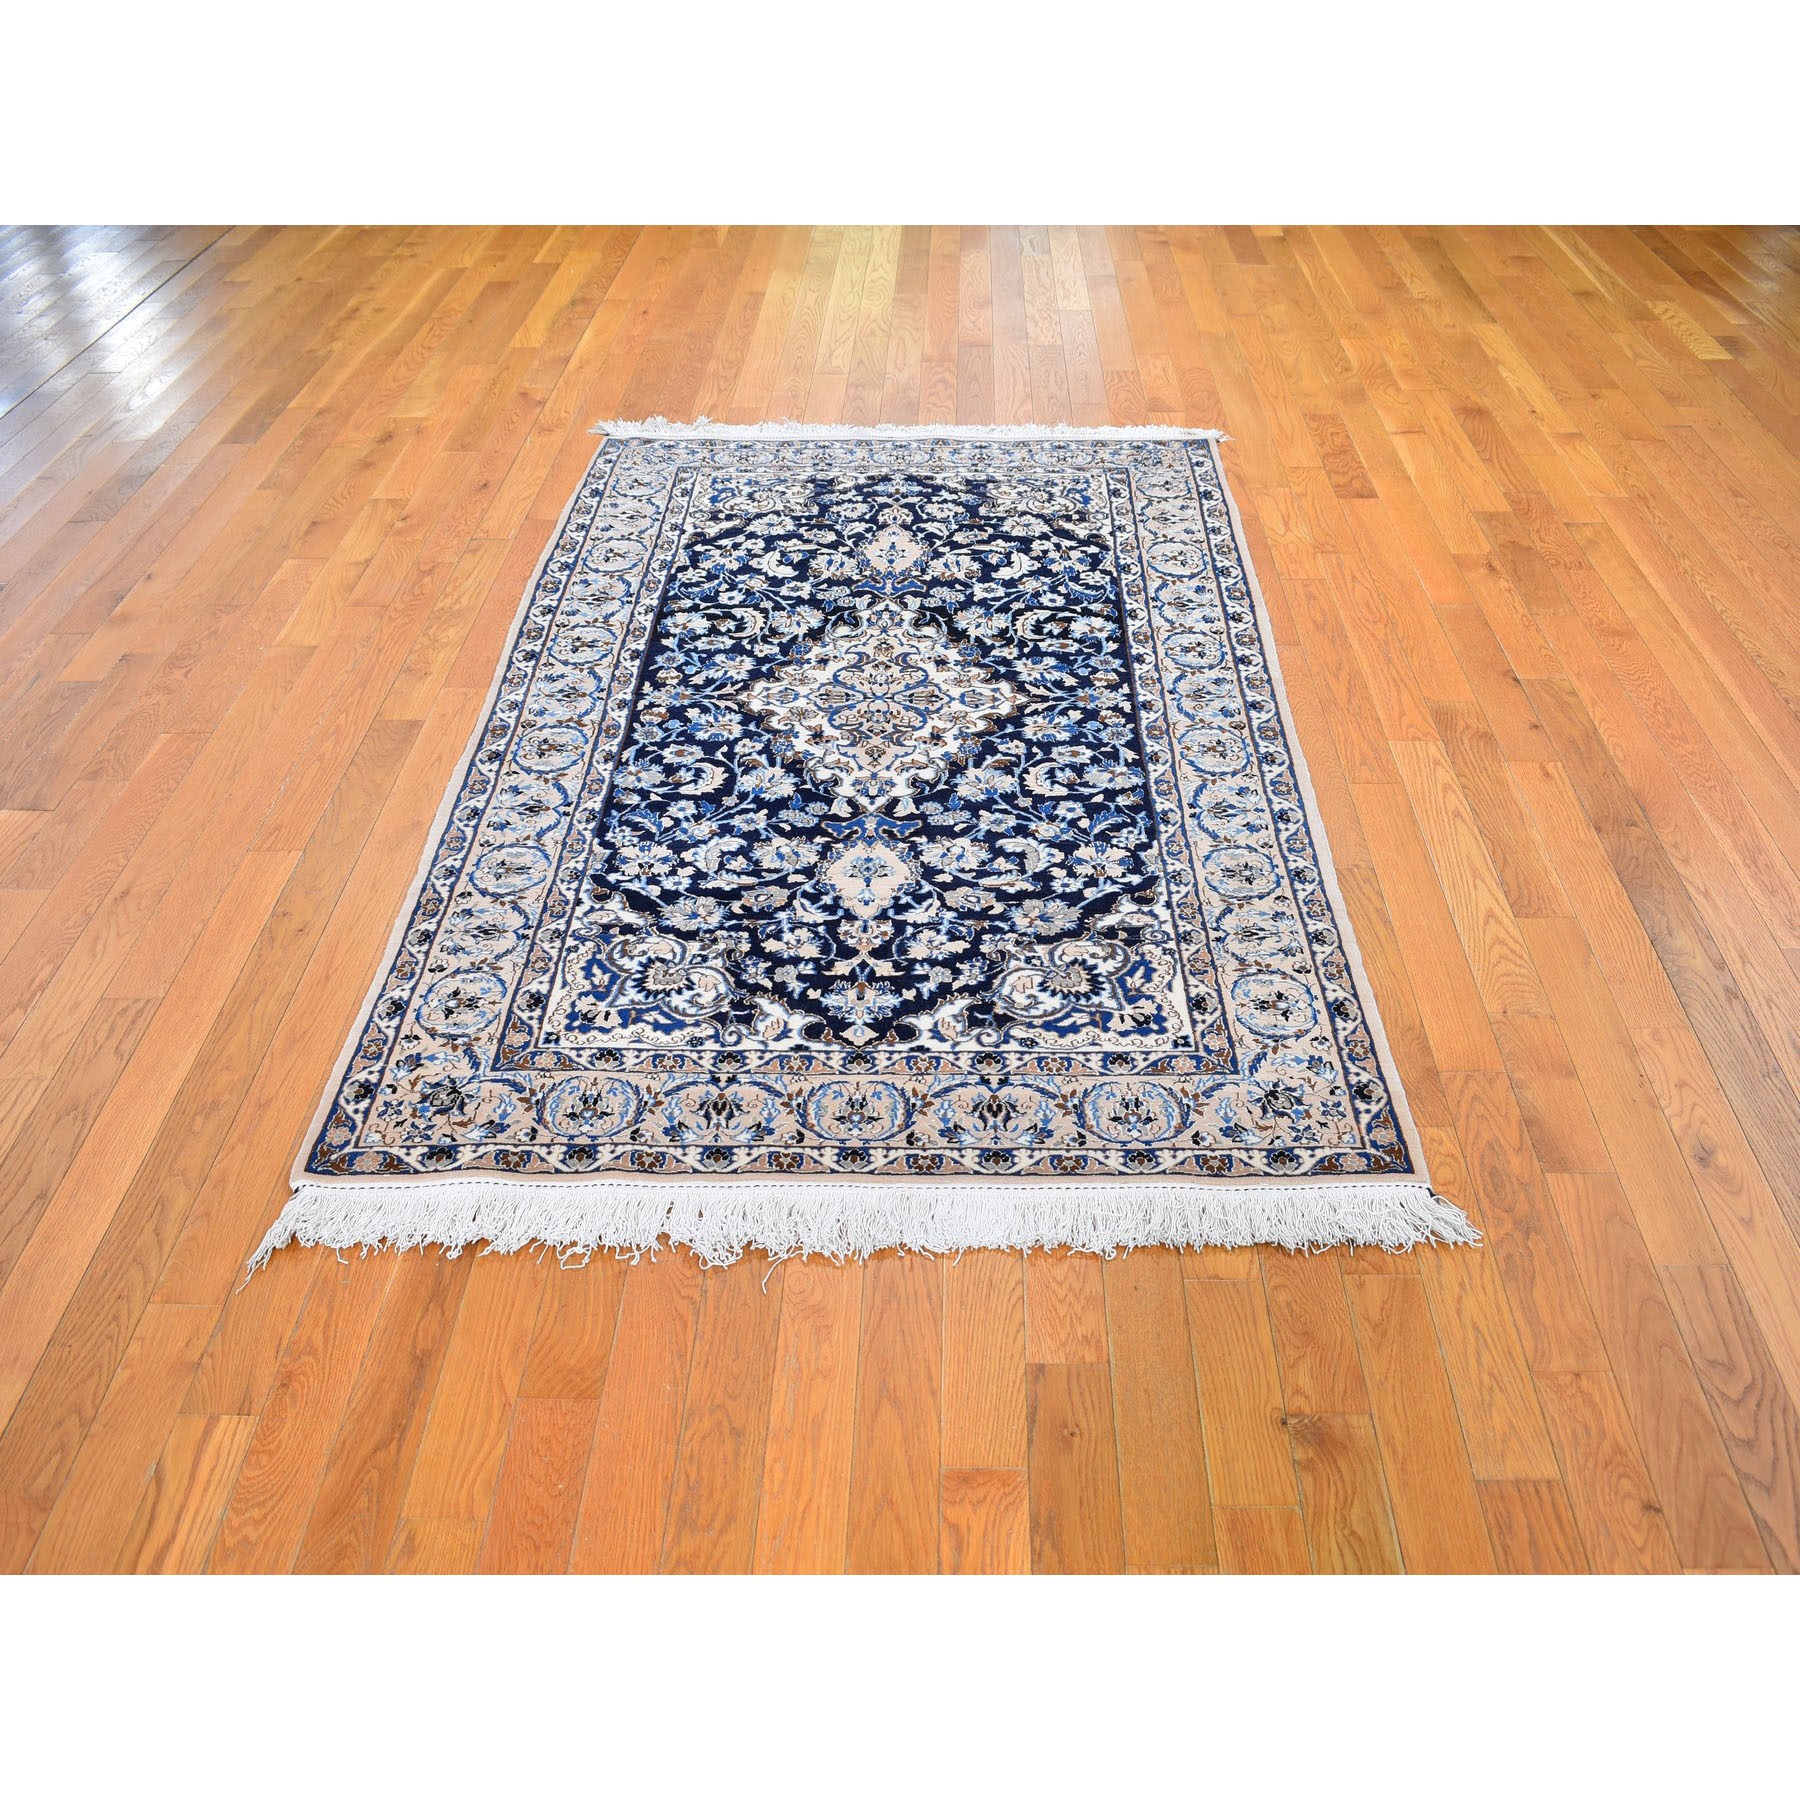 4-2 x6-10   Navy Blue New Persian Nain Wool And Silk 400 KPSI Hand Knotted Oriental Rug 